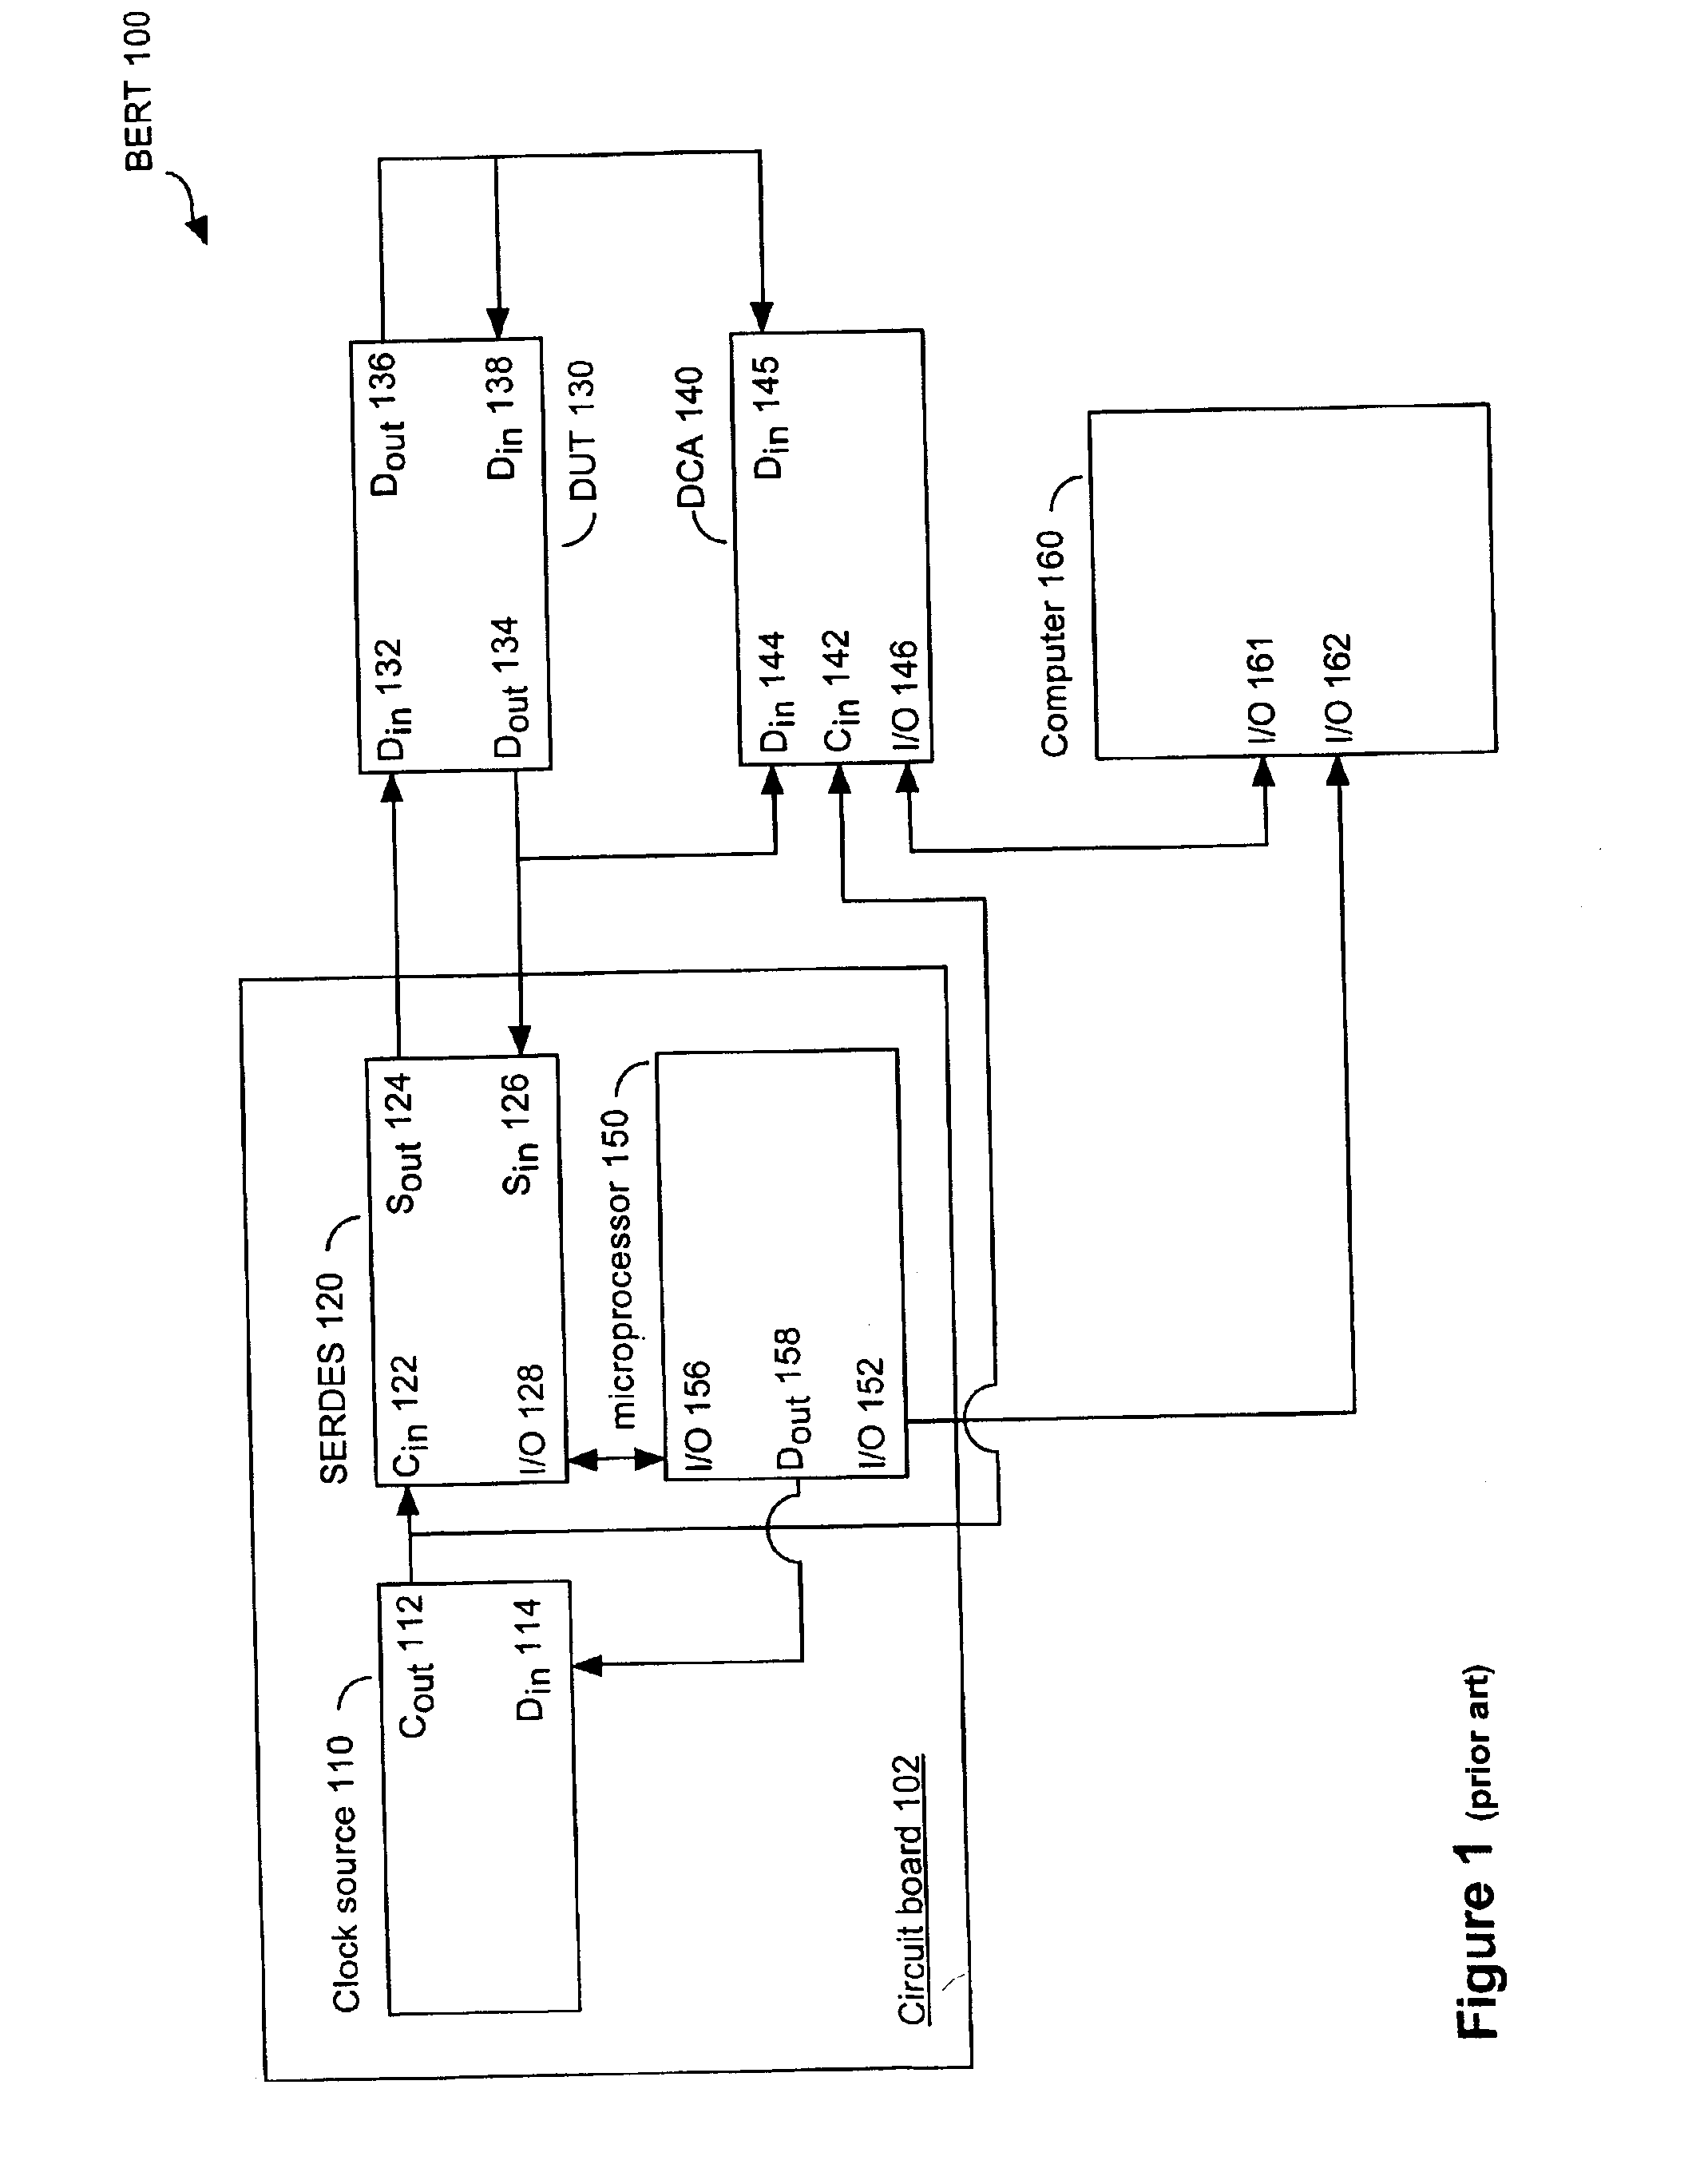 System and method of processing a data signal